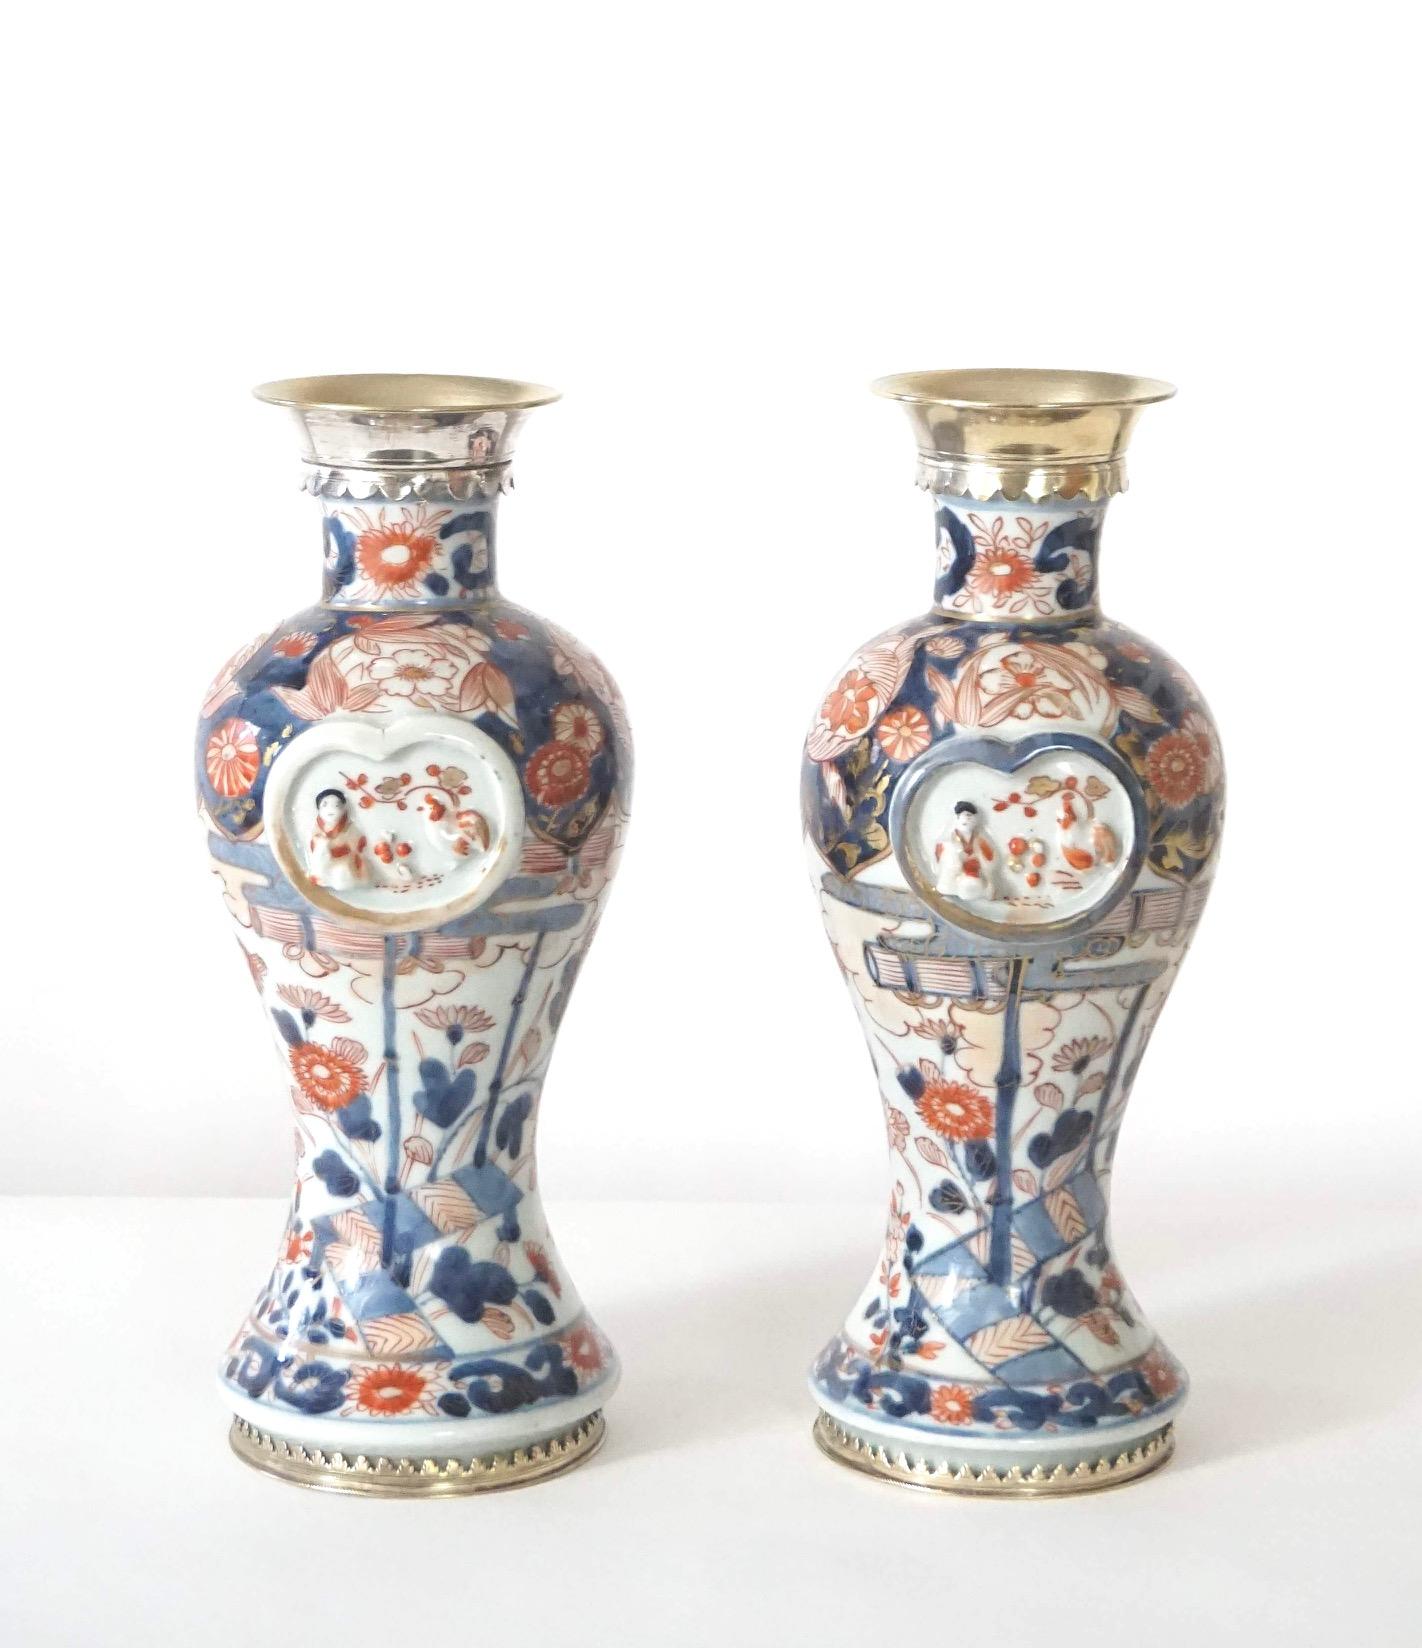 A wonderful and rare near pair of first quarter 18th century Japanese Edo Imari garniture vases of baluster form having silver-gilt paktong neck and foot mounts in traditional imari color palette of underglaze blue and overglaze iron red and gold